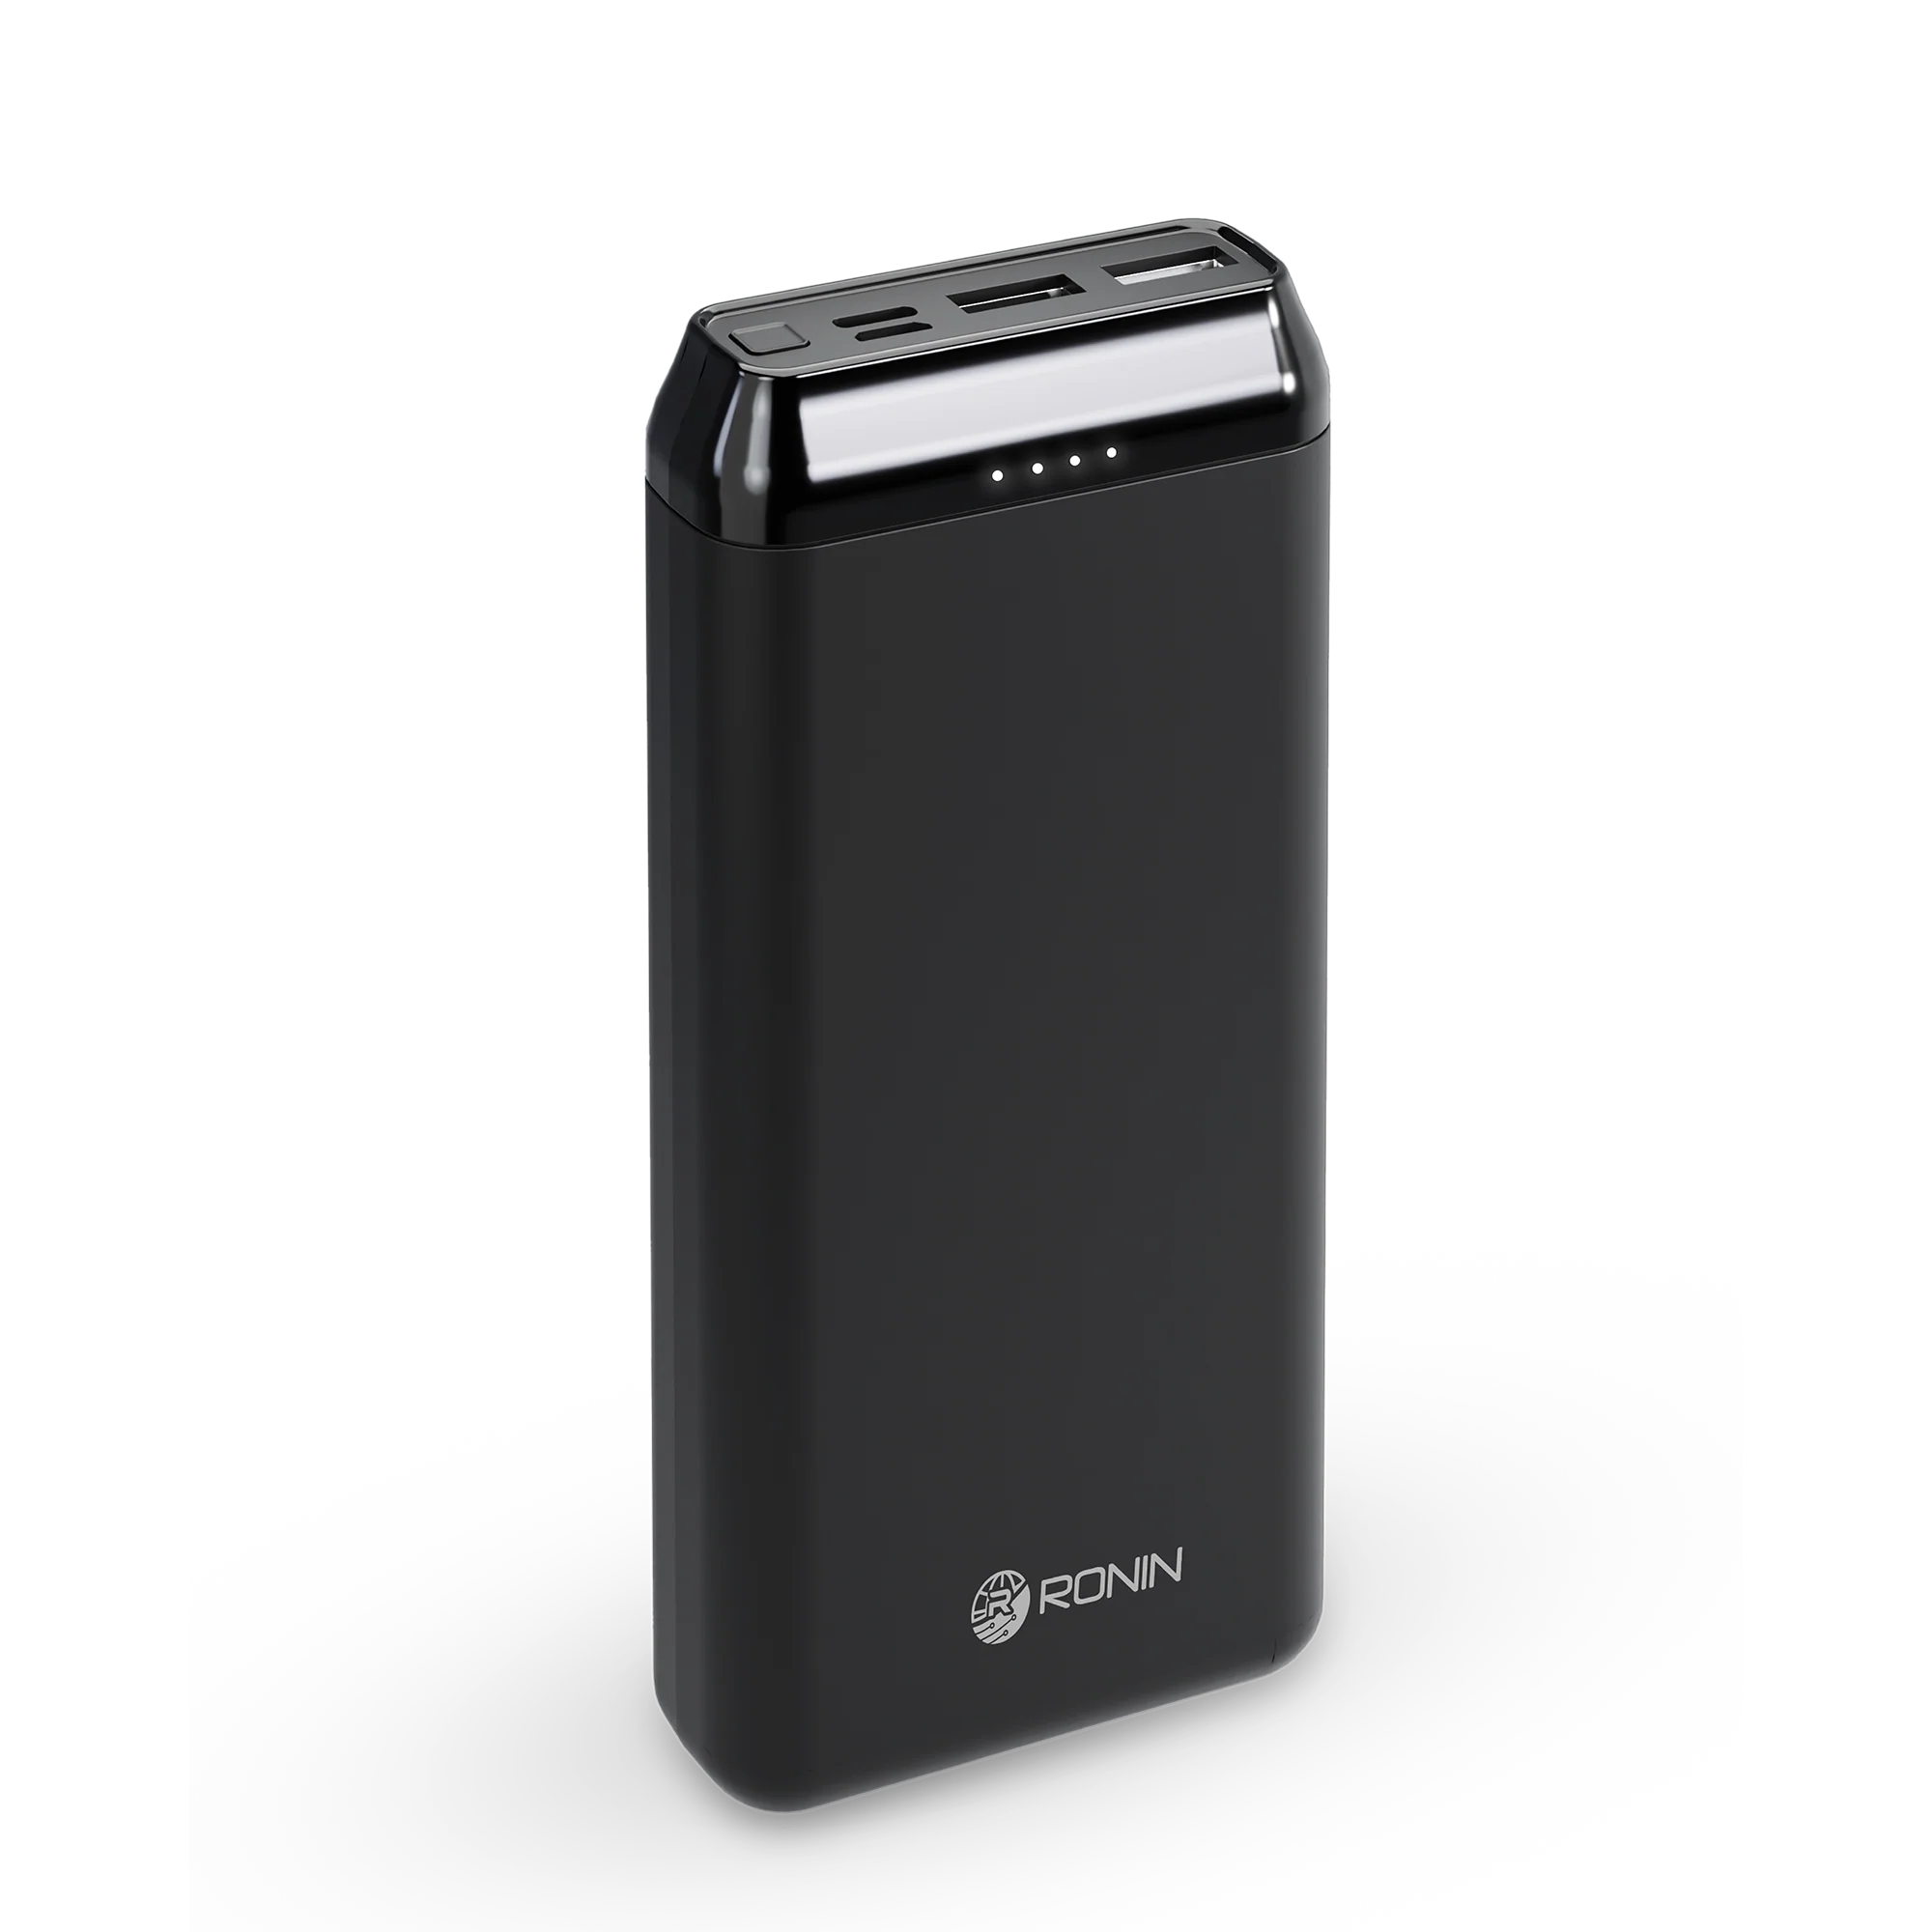 Ronin R-89 20000 MAh Power Bank: Ultra-High Capacity Power Bank for All-Day Use